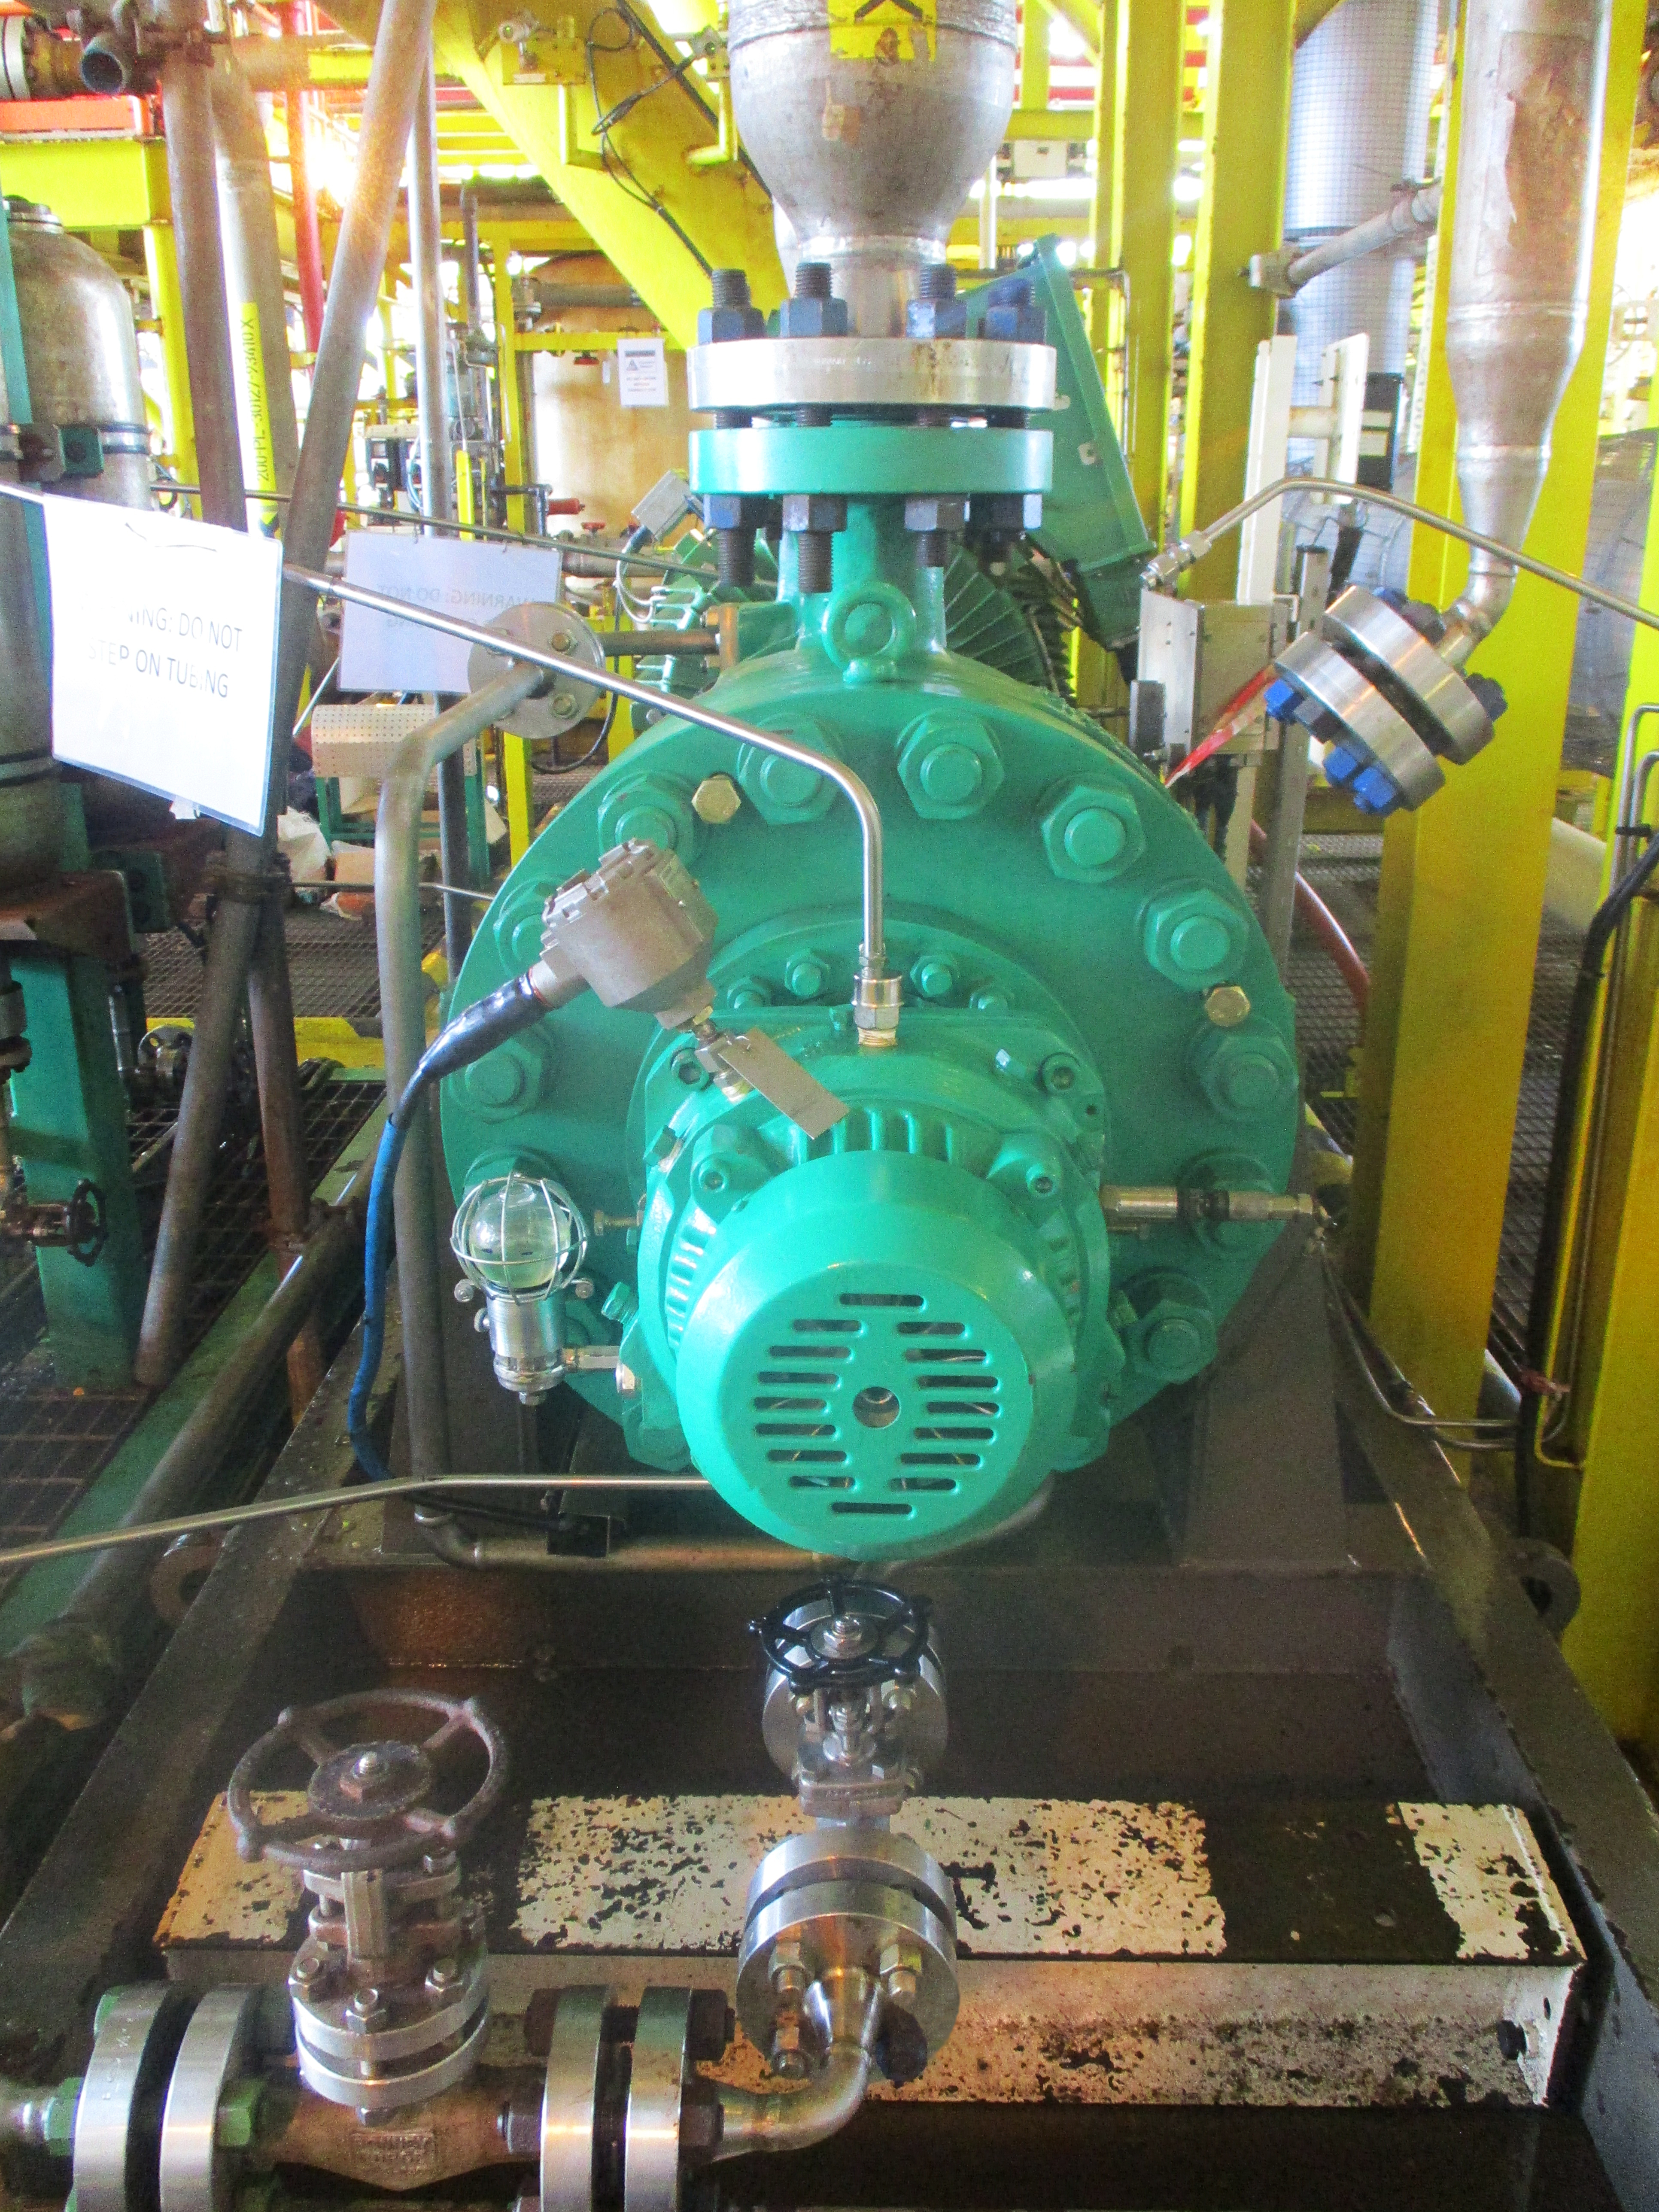 Following the retrofit, the MTBF for the pumps was increased from 12 to 48 months.